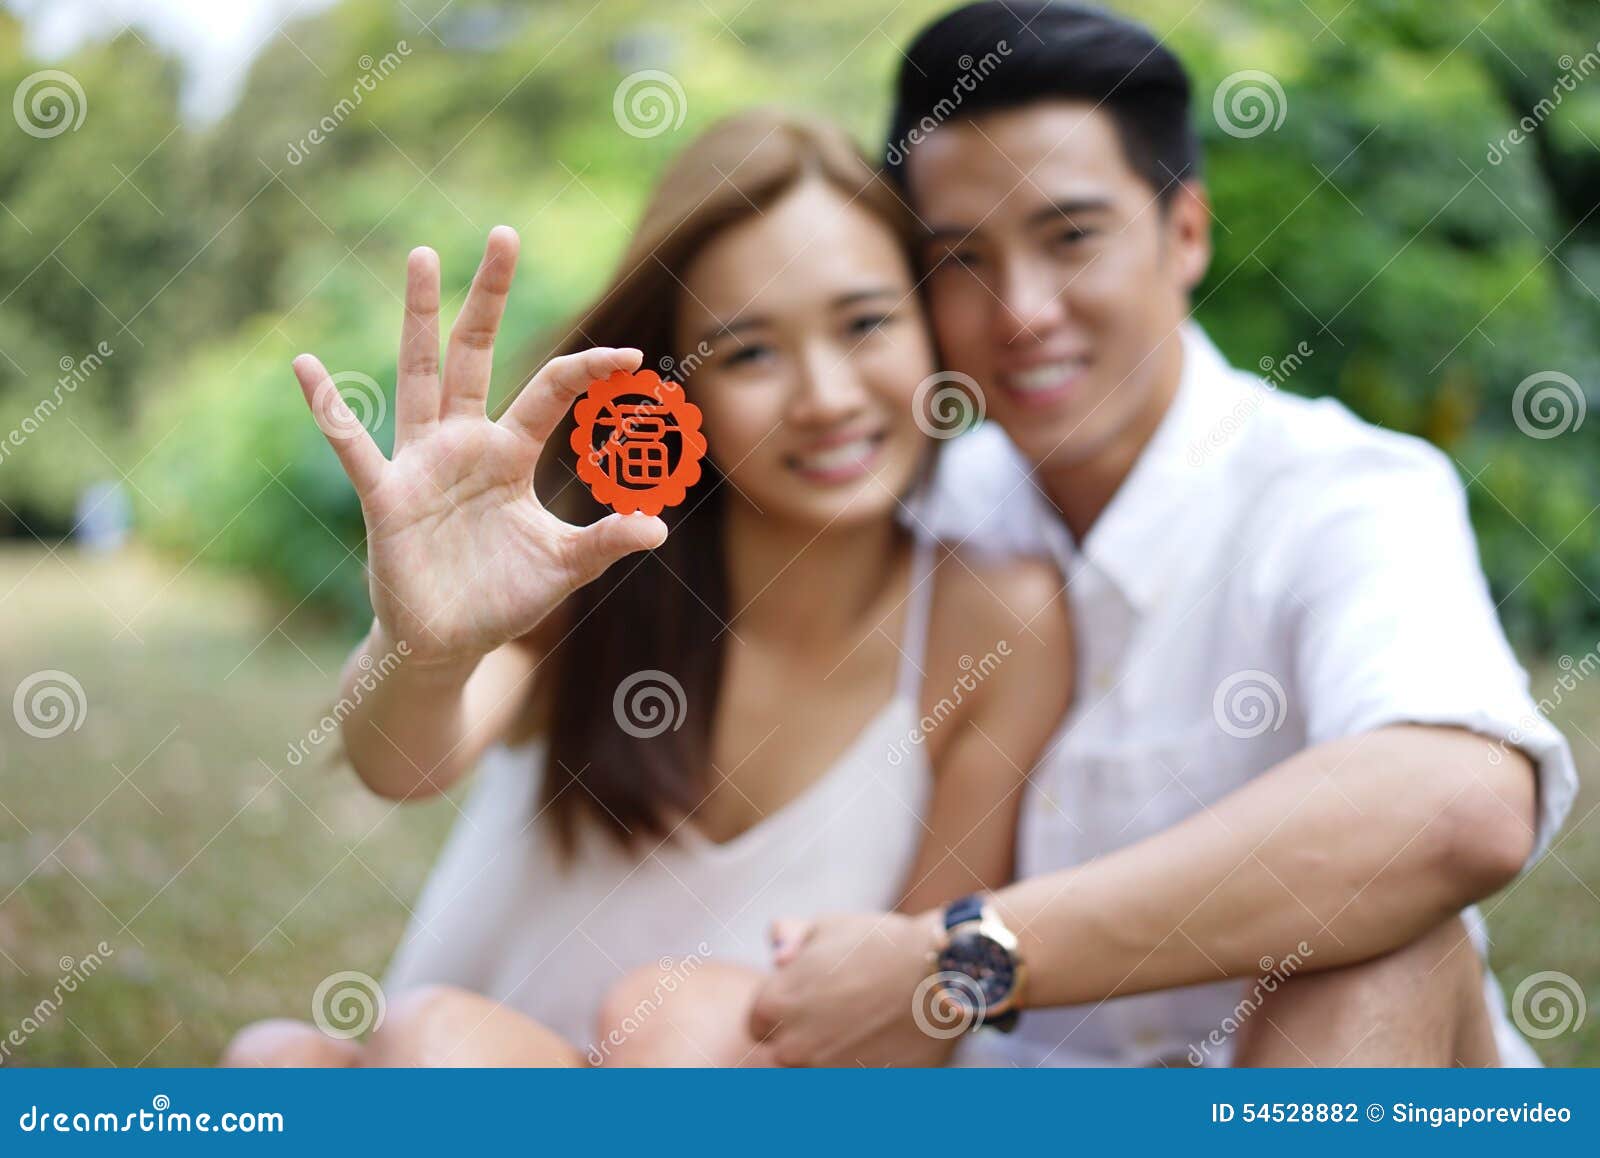 https://thumbs.dreamstime.com/z/happy-asian-couple-love-holding-symbol-happily-representing-good-luck-good-fortune-54528882.jpg